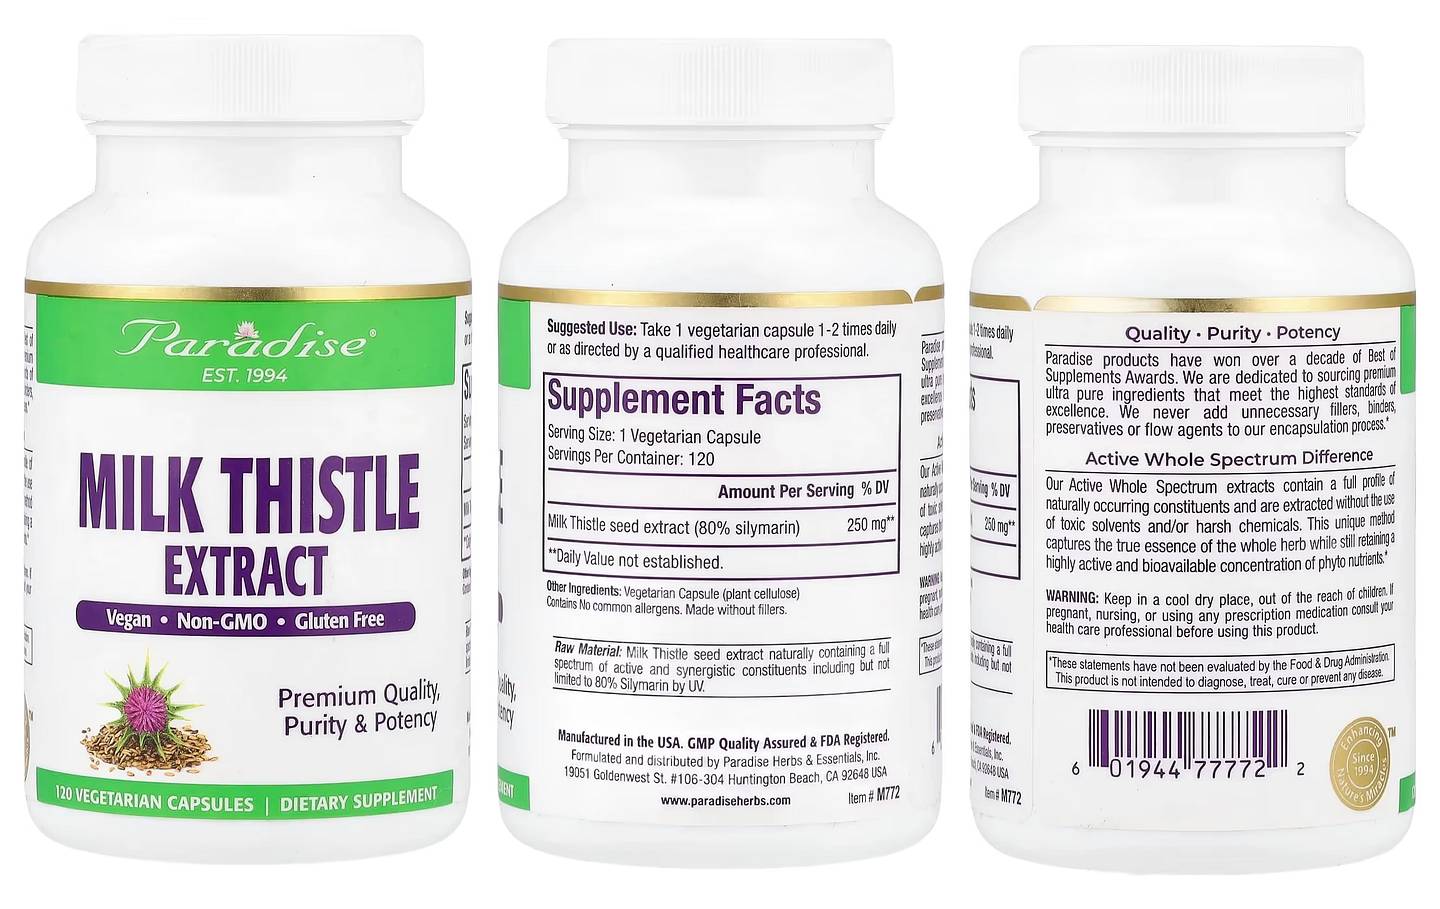 Paradise Herbs, Milk Thistle Extract packaging